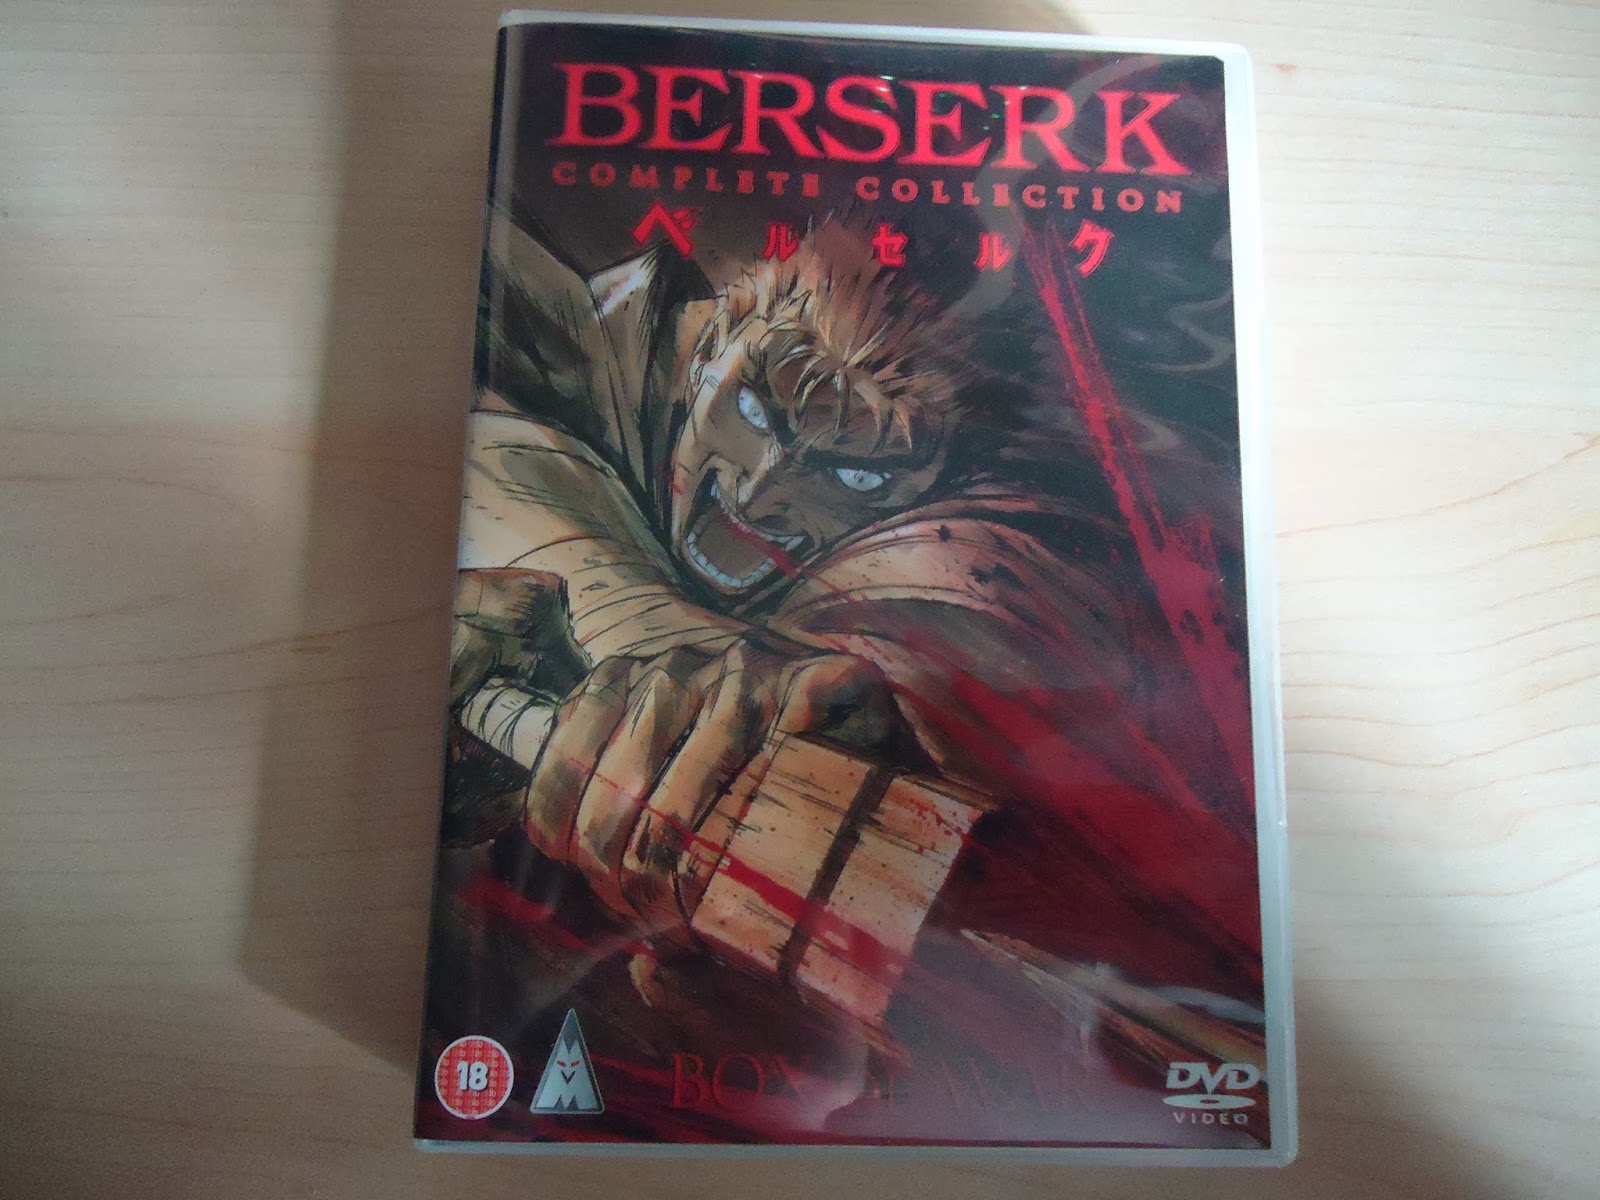  Berserk: Complete Collection (Remastered) [DVD